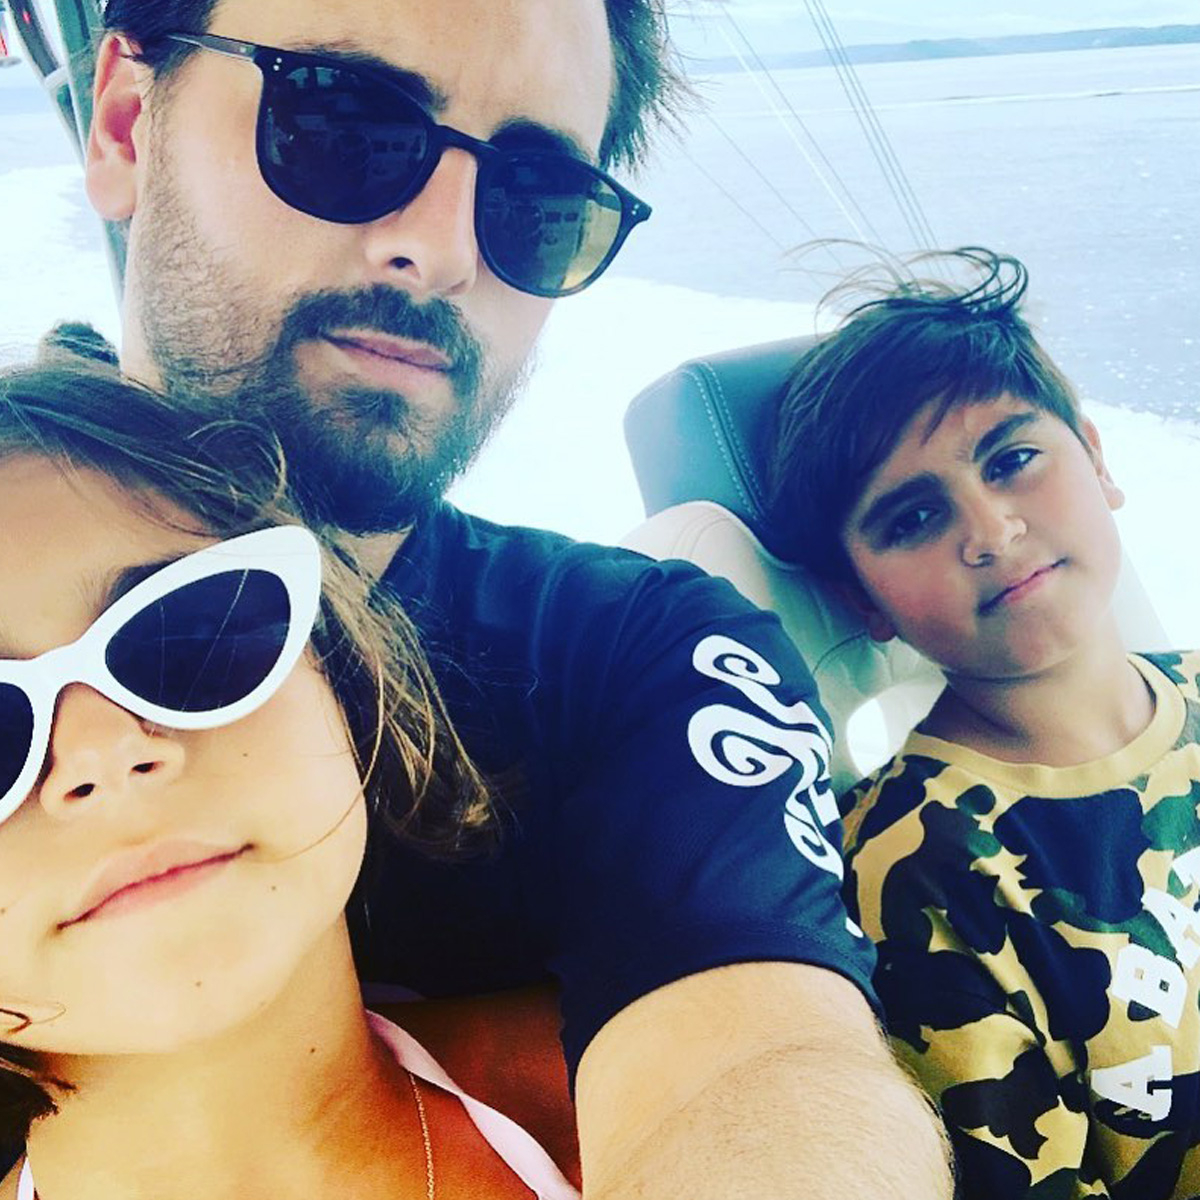 Scott Disick Gives Update on What Mason Disick Is Like as a Teenager